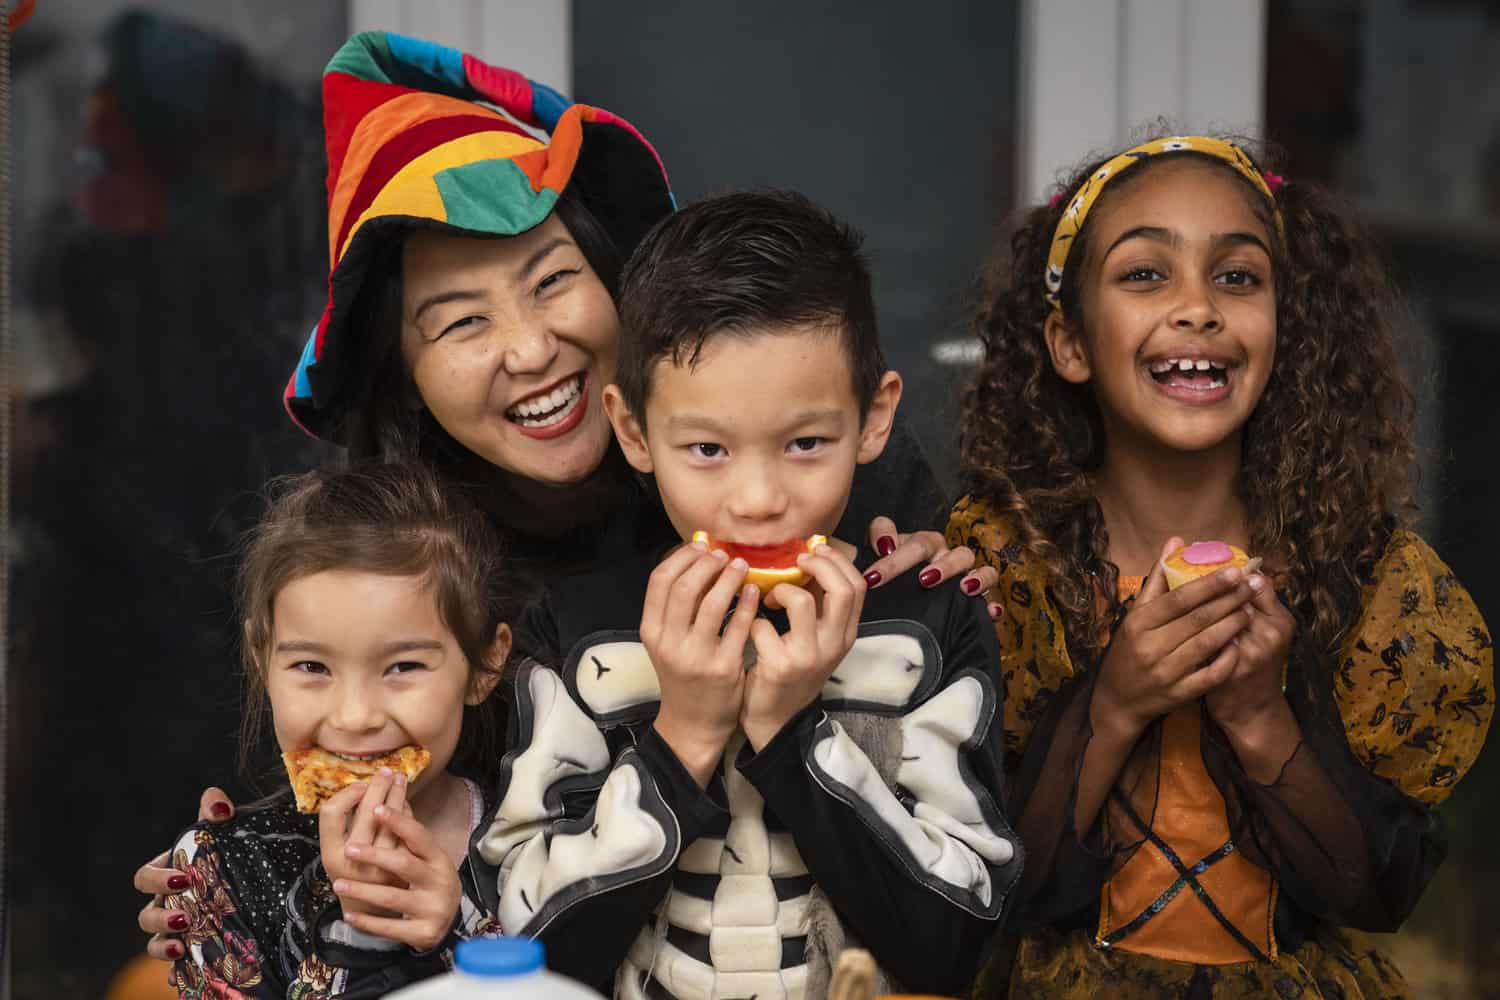 Children in Halloween costumes eating candy.